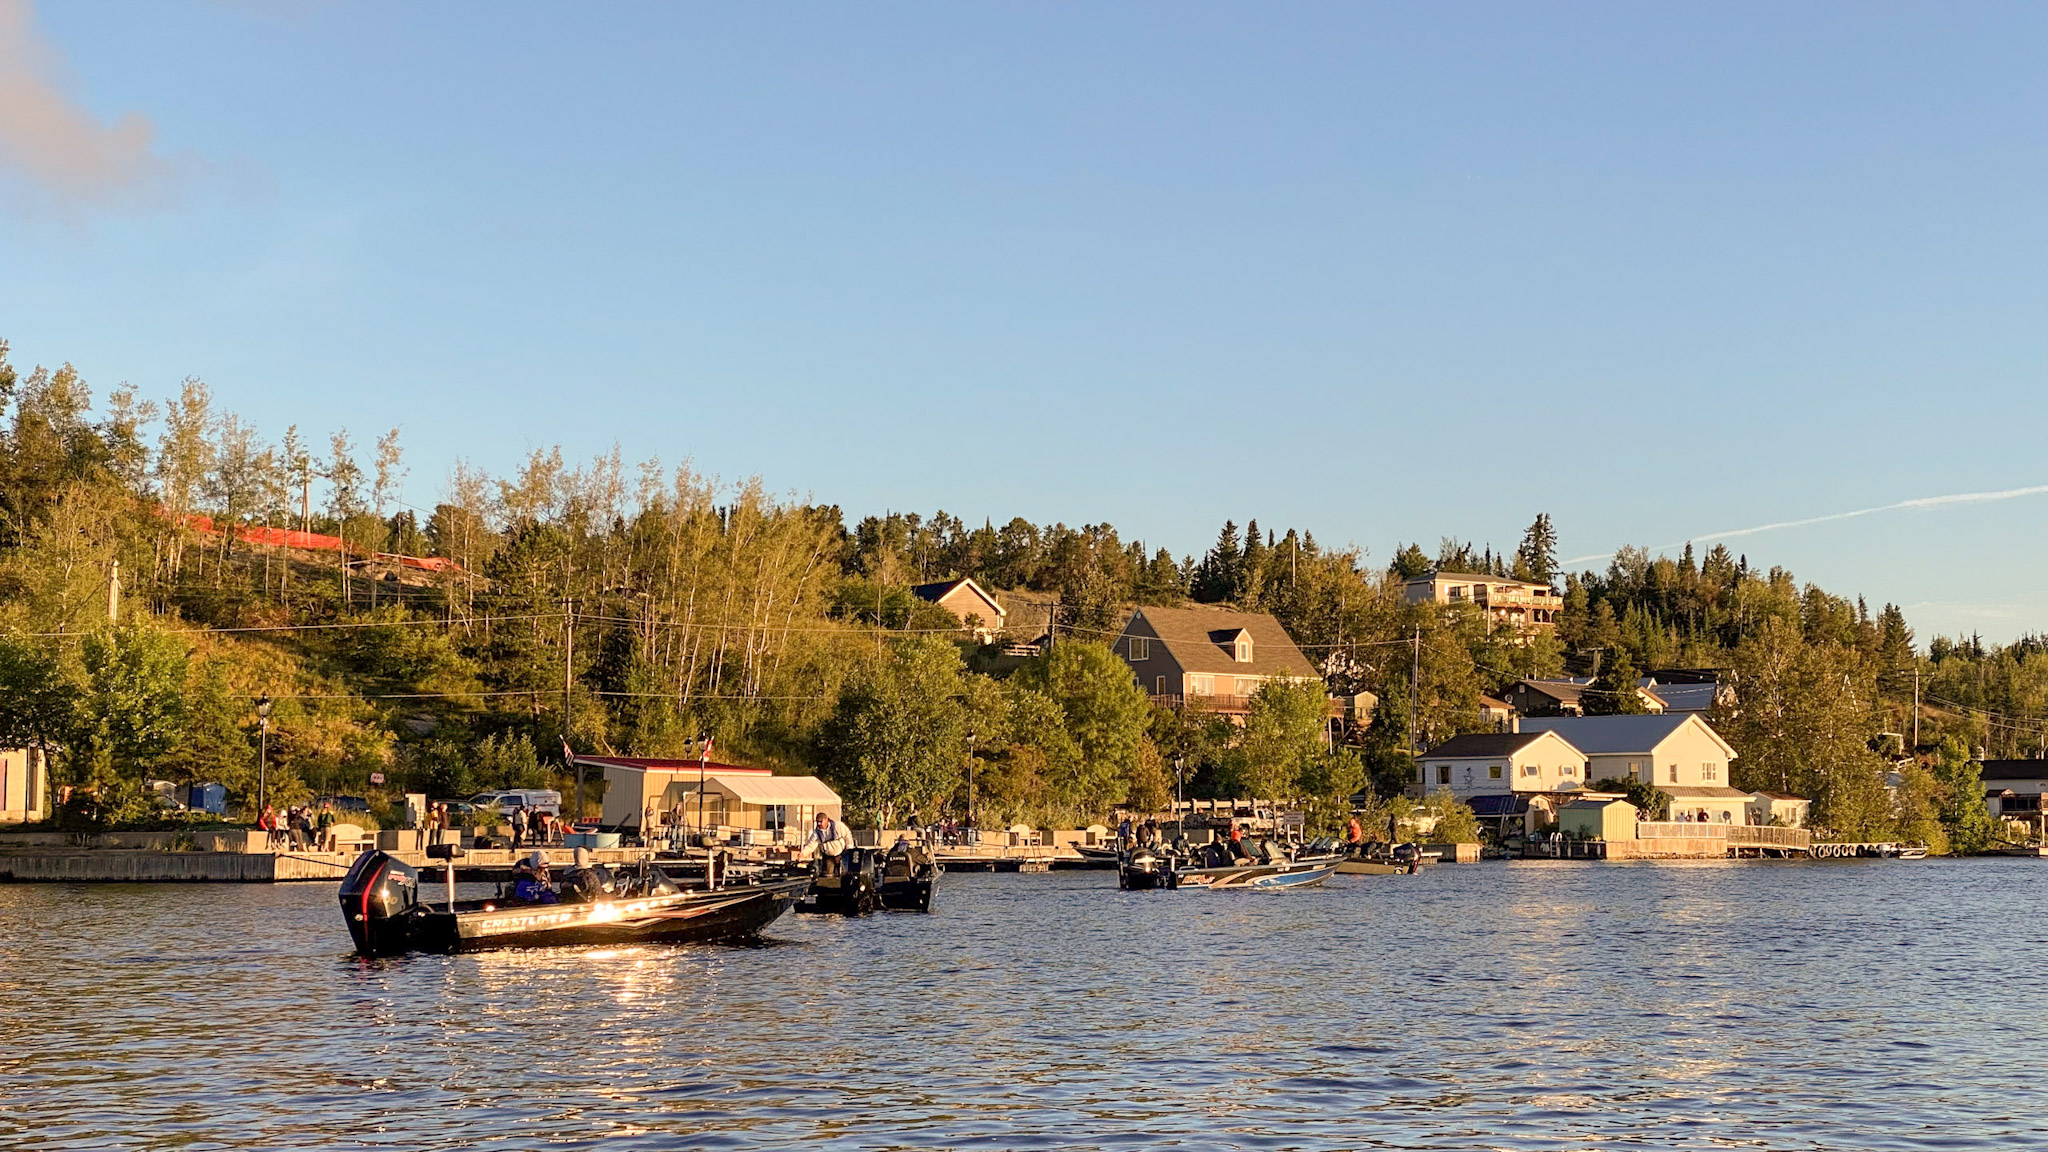 Red Lake; motor boats float in calm blue water next to docks on a green, forested lakeshore dotted with houses. Golden late afternoon sun shines in a hazy blue sky. 